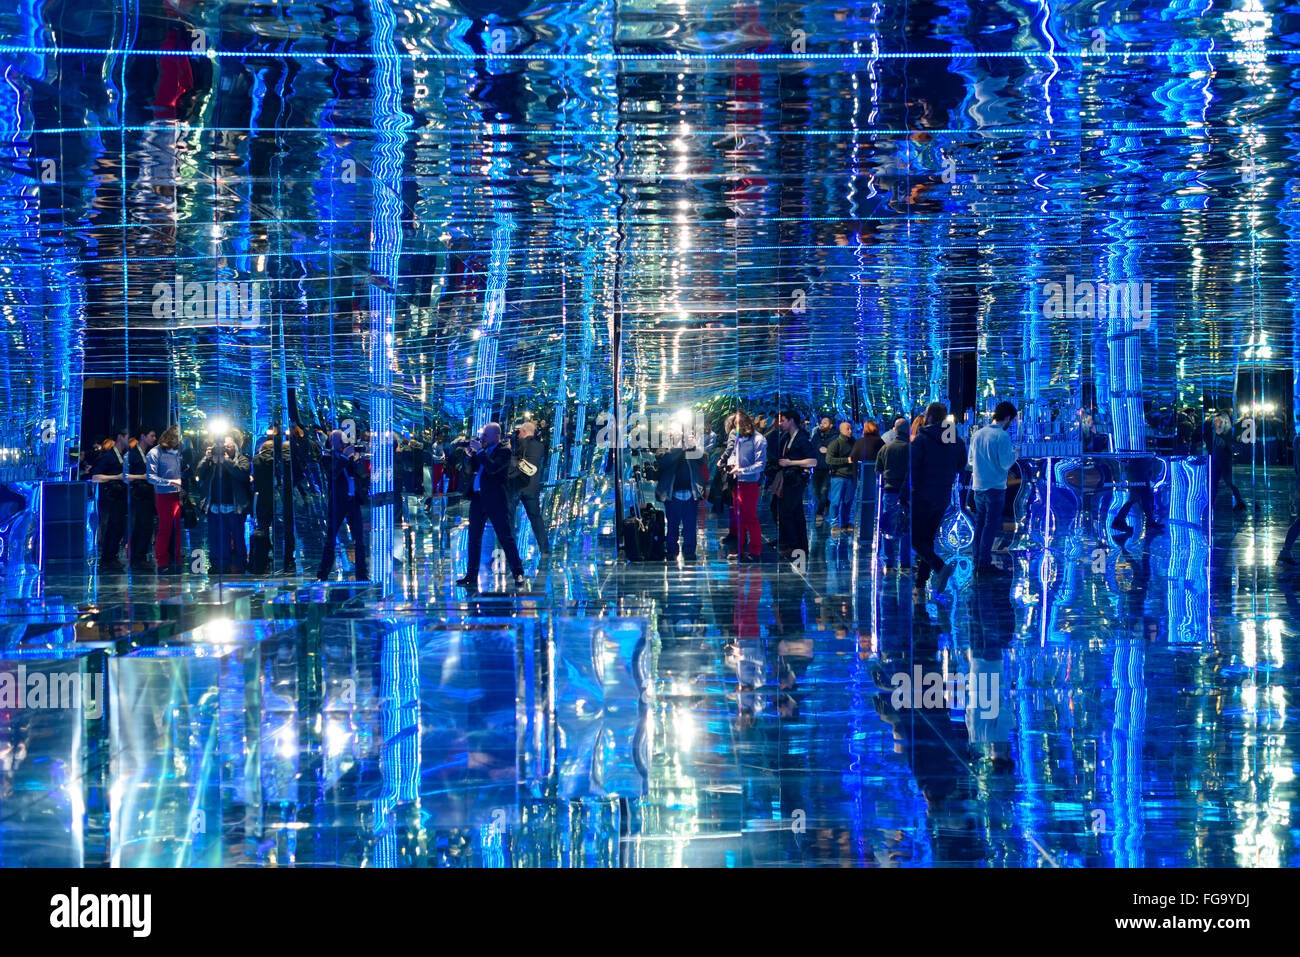 Madrid, Spain. 18th February 2016. The Art Room surrounded by mirrors. The Bombay Sapphire have designed the MBFW 2016 Madrid kissing room with a spacious blue themed mirror surround hall, #TheatreRoom,  and The Art Room, with large LED screen that reflects the movements of people using Wii type technology at MBFW 2016 Madrid, Spain. Credit:  Lawrence JC Baron/Alamy Live News. Stock Photo